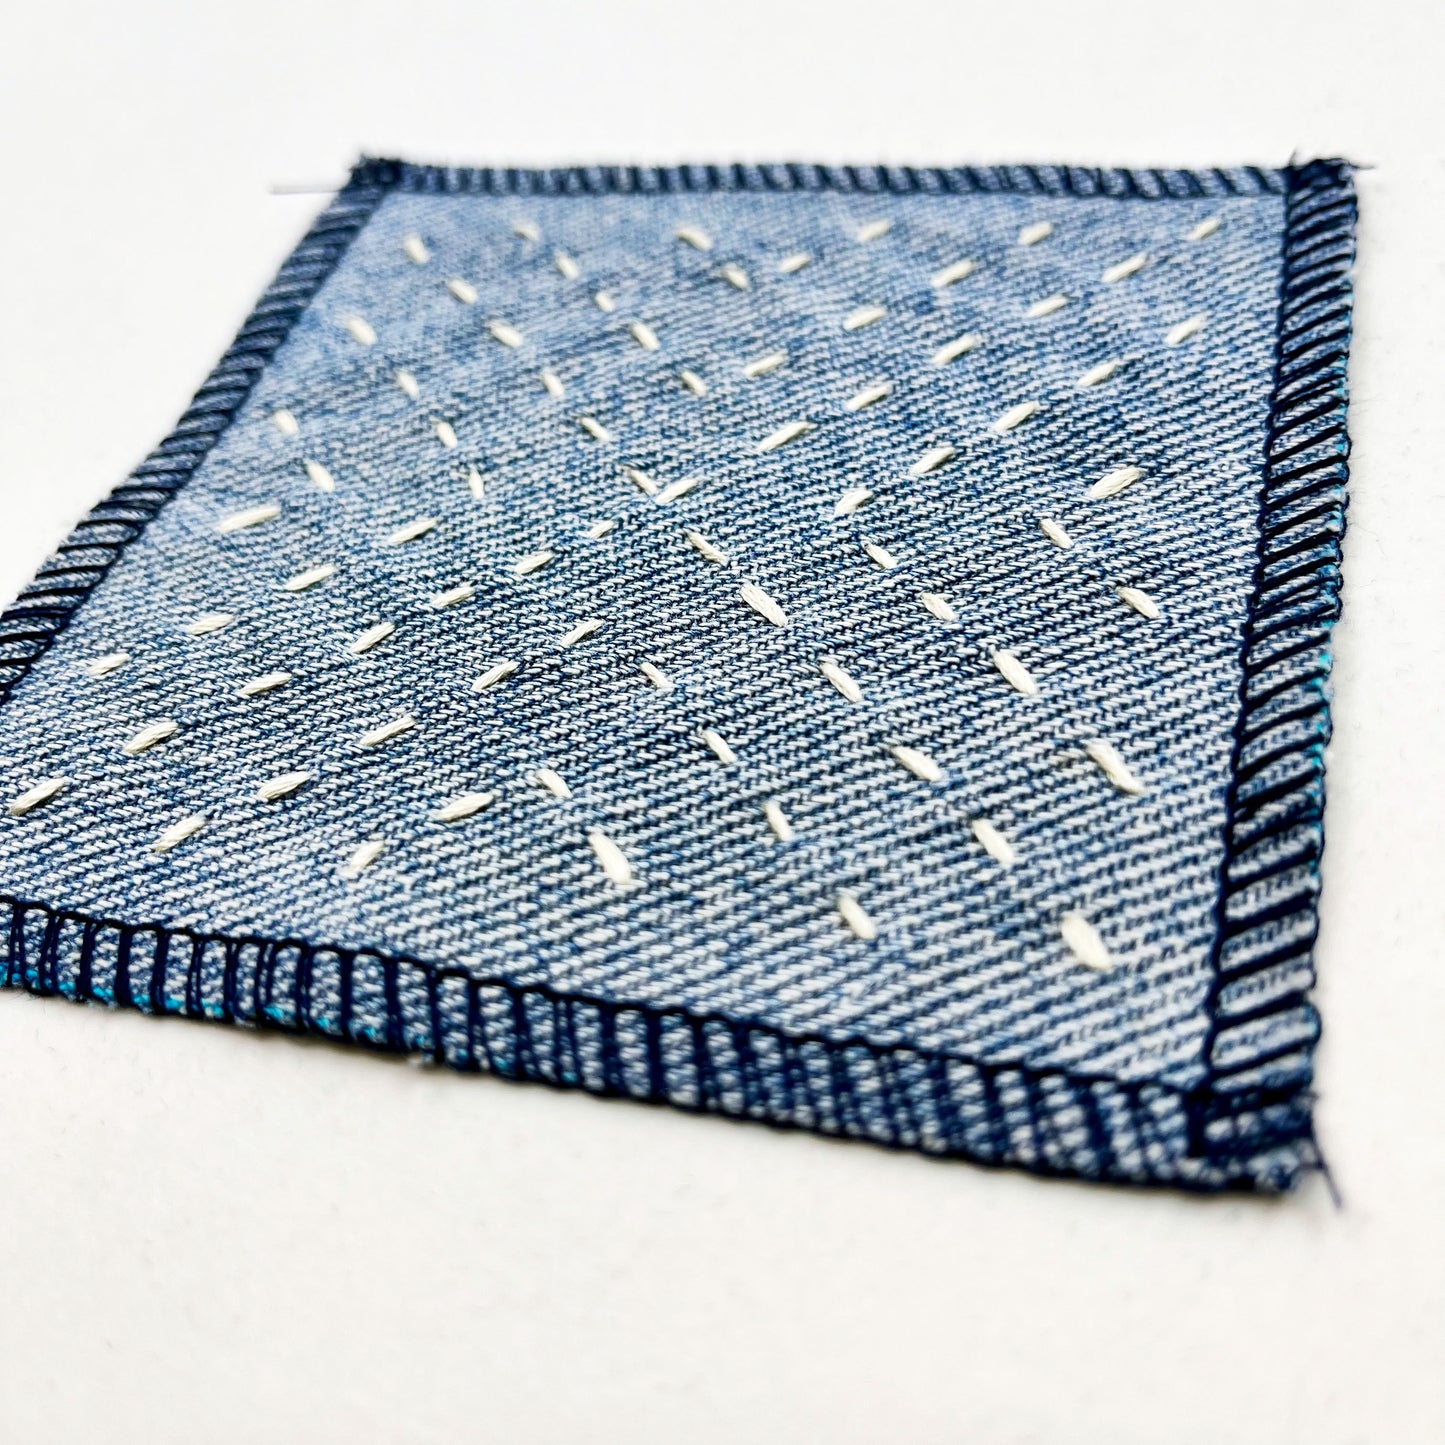 close up angled view of a square patch made out of denim, handstitched with ivory running stitches in a radiating X pattern, with overlocked edges, on a white background